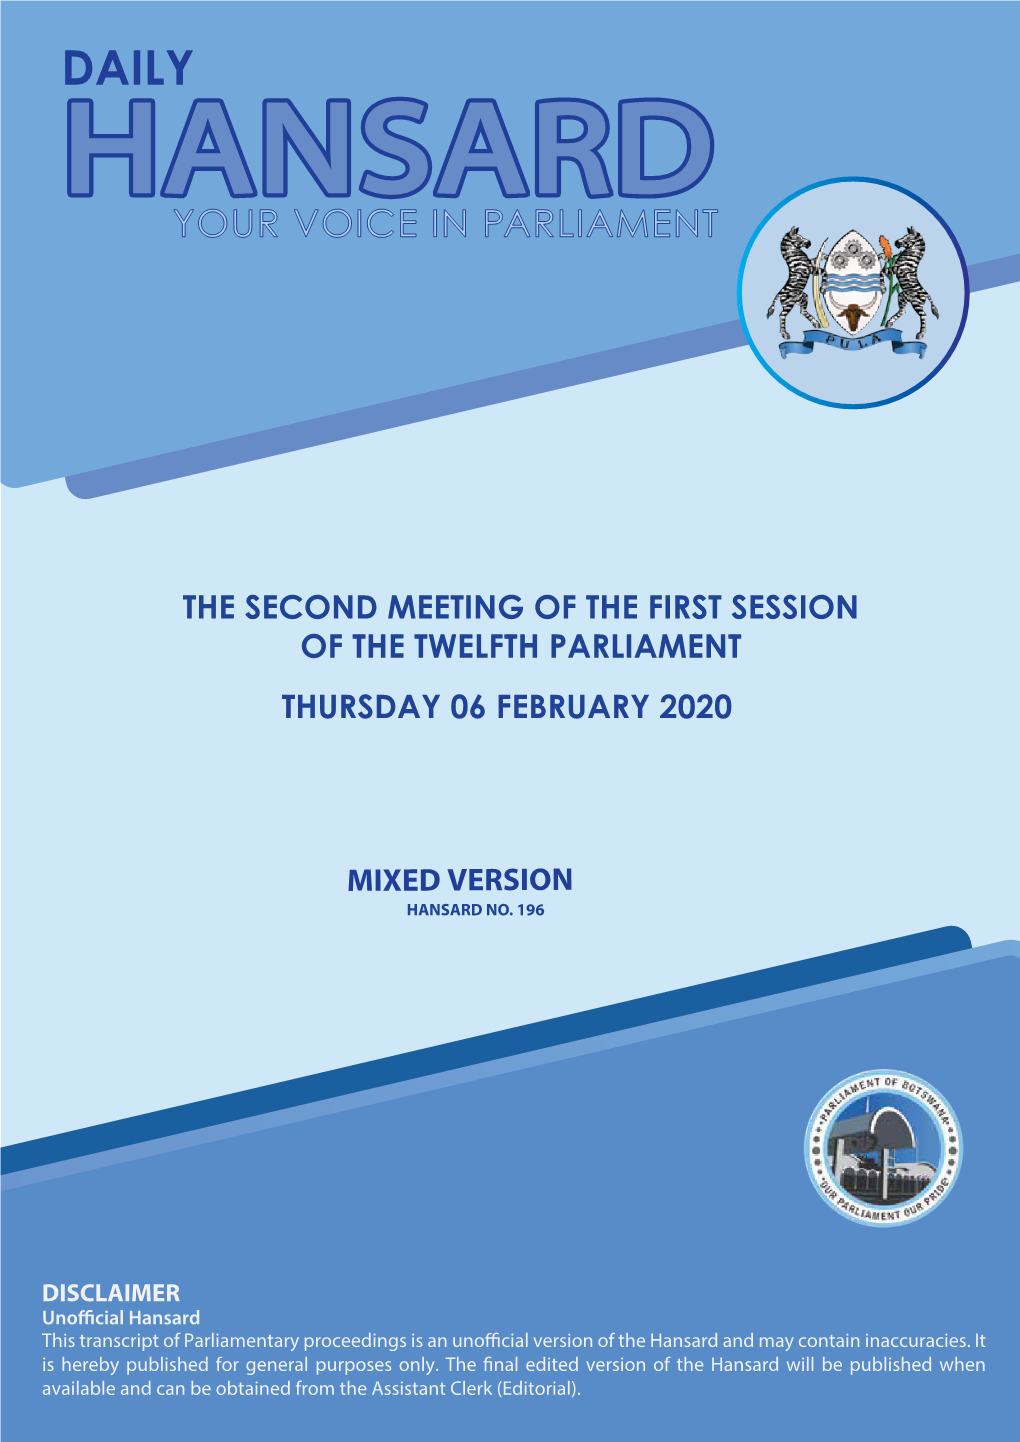 The Second Meeting of the Fifth Session